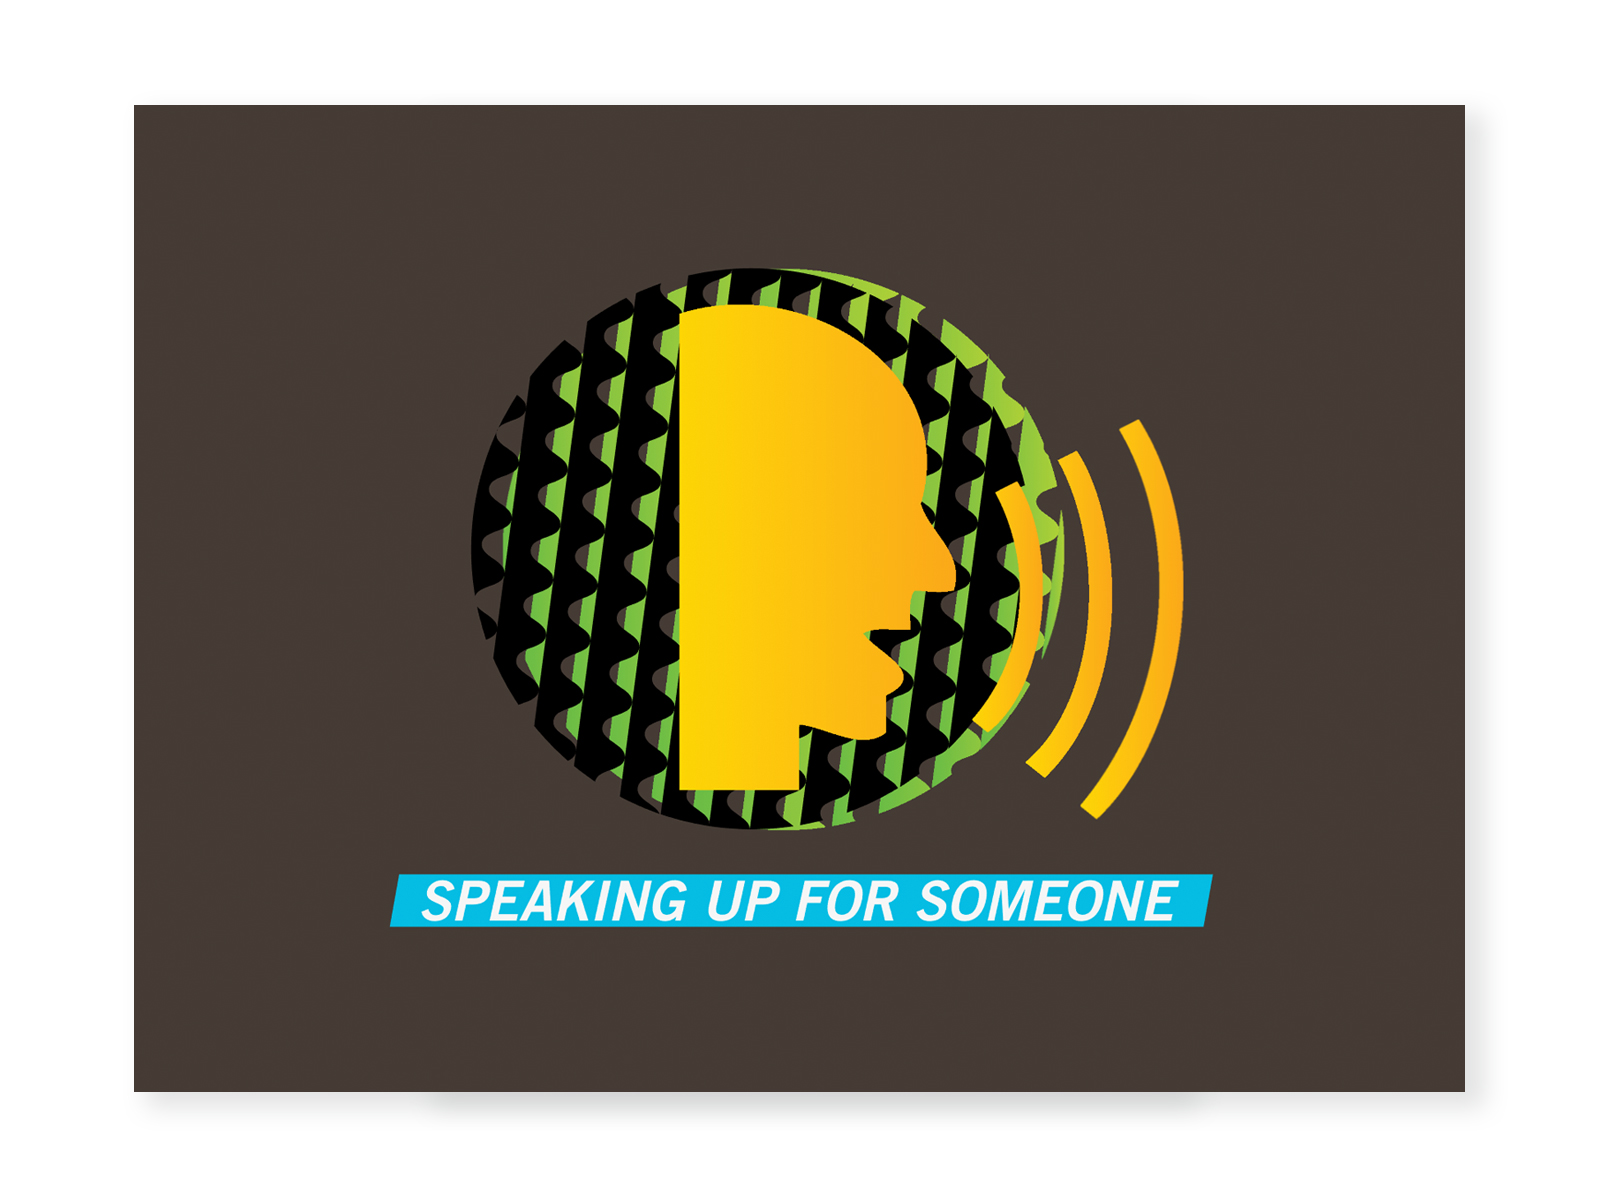 Text: Speaking up for someone, with an icon of people speaking